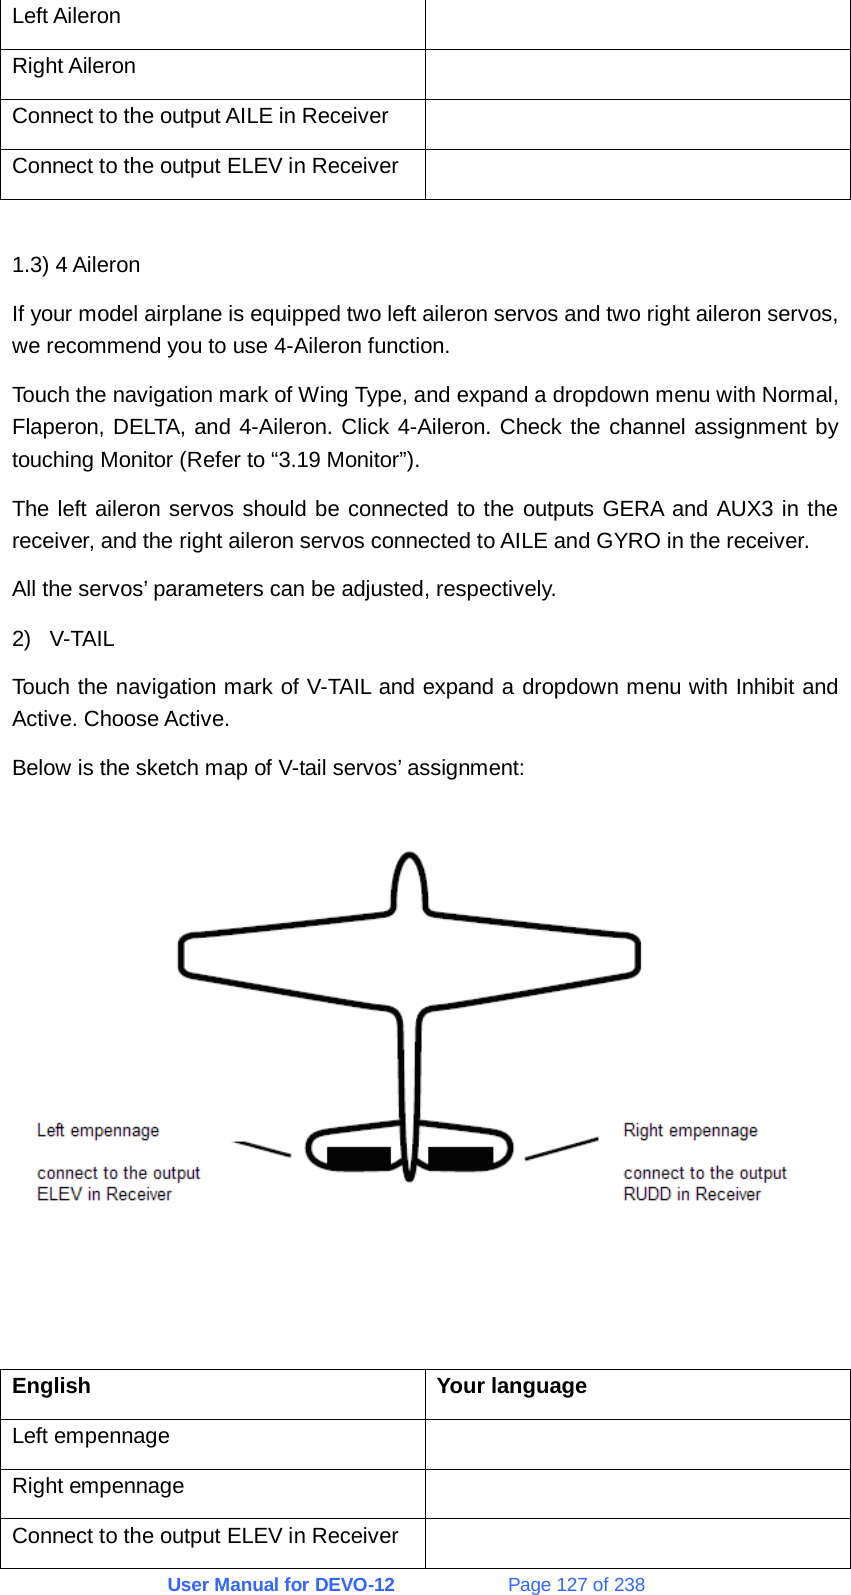 User Manual for DEVO-12             Page 127 of 238 Left Aileron   Right Aileron   Connect to the output AILE in Receiver   Connect to the output ELEV in Receiver    1.3) 4 Aileron If your model airplane is equipped two left aileron servos and two right aileron servos, we recommend you to use 4-Aileron function. Touch the navigation mark of Wing Type, and expand a dropdown menu with Normal, Flaperon, DELTA, and 4-Aileron. Click 4-Aileron. Check the channel assignment by touching Monitor (Refer to “3.19 Monitor”). The left aileron servos should be connected to the outputs GERA and AUX3 in the receiver, and the right aileron servos connected to AILE and GYRO in the receiver. All the servos’ parameters can be adjusted, respectively. 2) V-TAIL Touch the navigation mark of V-TAIL and expand a dropdown menu with Inhibit and Active. Choose Active. Below is the sketch map of V-tail servos’ assignment:  English Your language Left empennage   Right empennage   Connect to the output ELEV in Receiver   